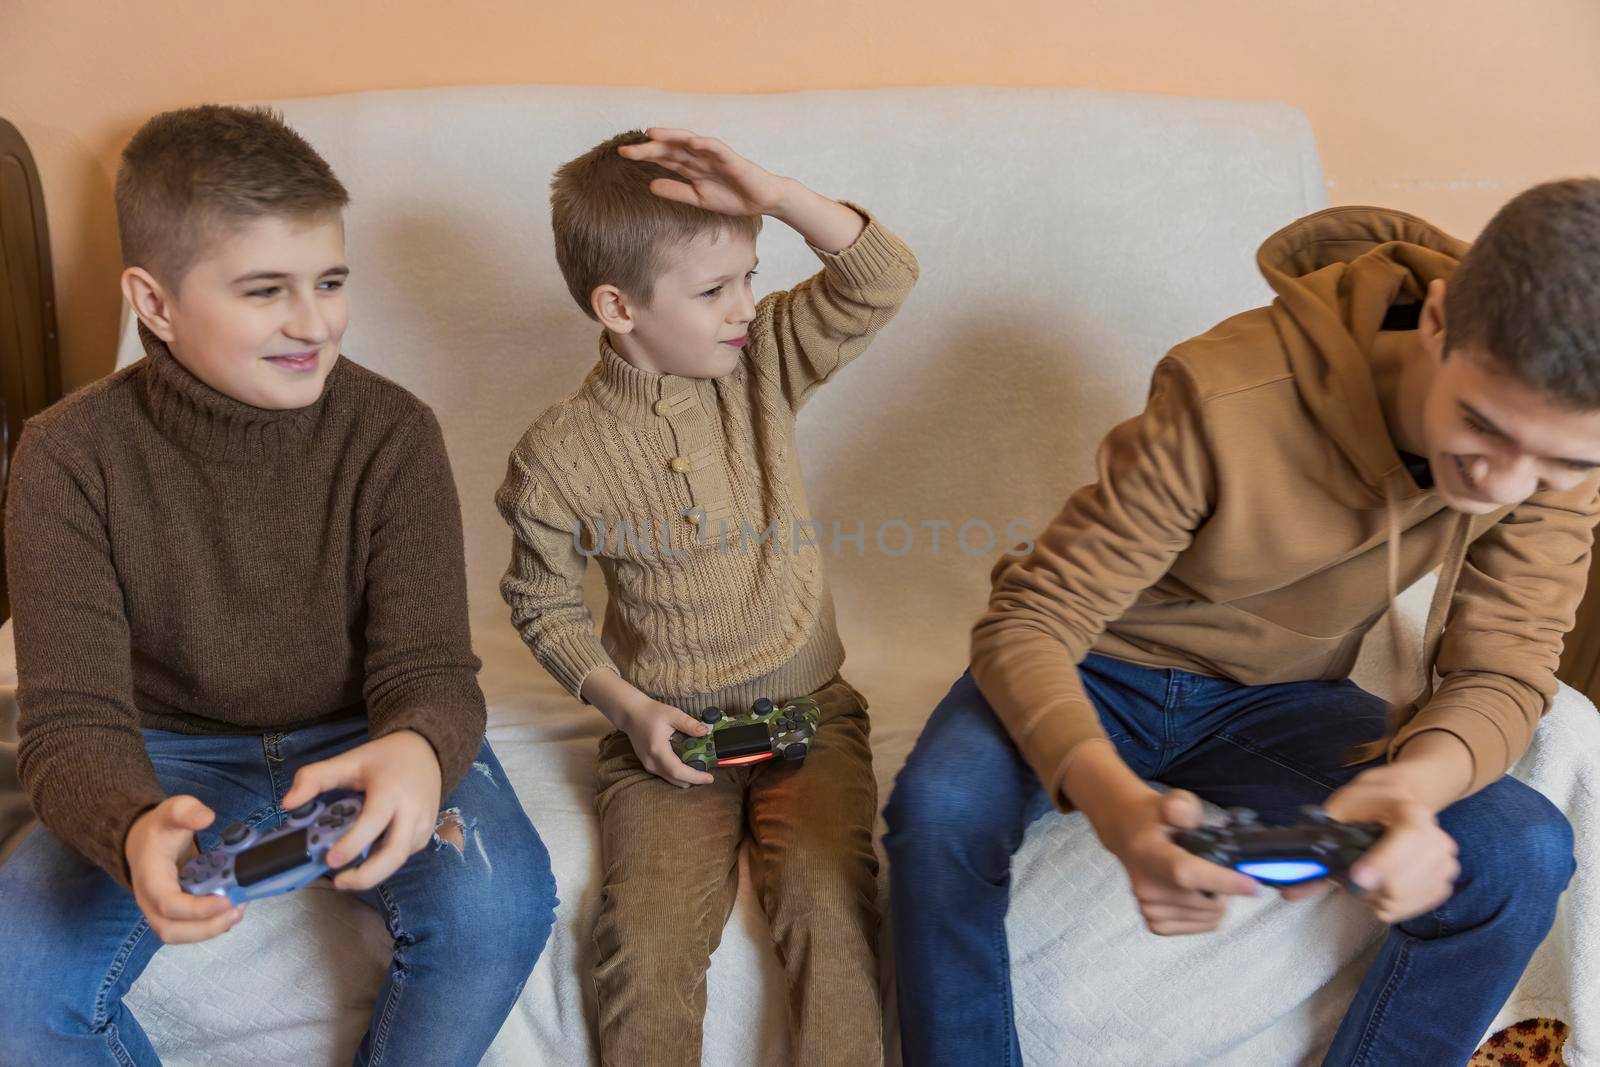 children playing console with joysticks